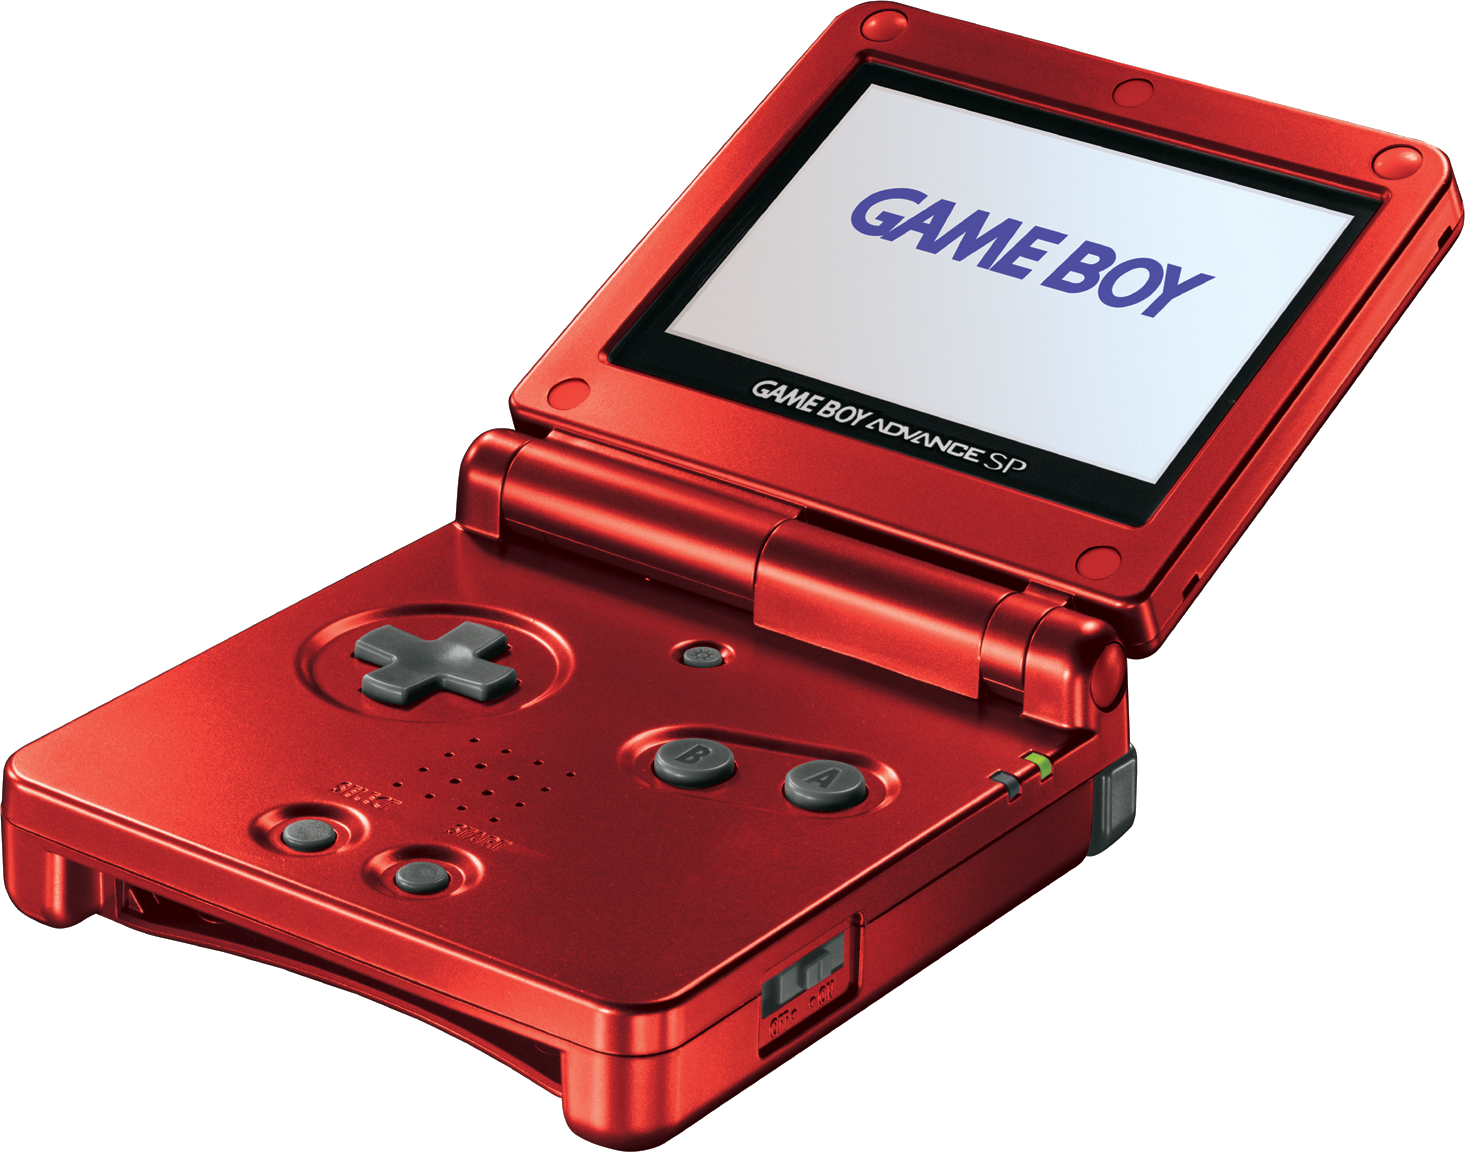 The 10 Biggest Selling Nintendo Game Boy Advance (GBA) Games Of